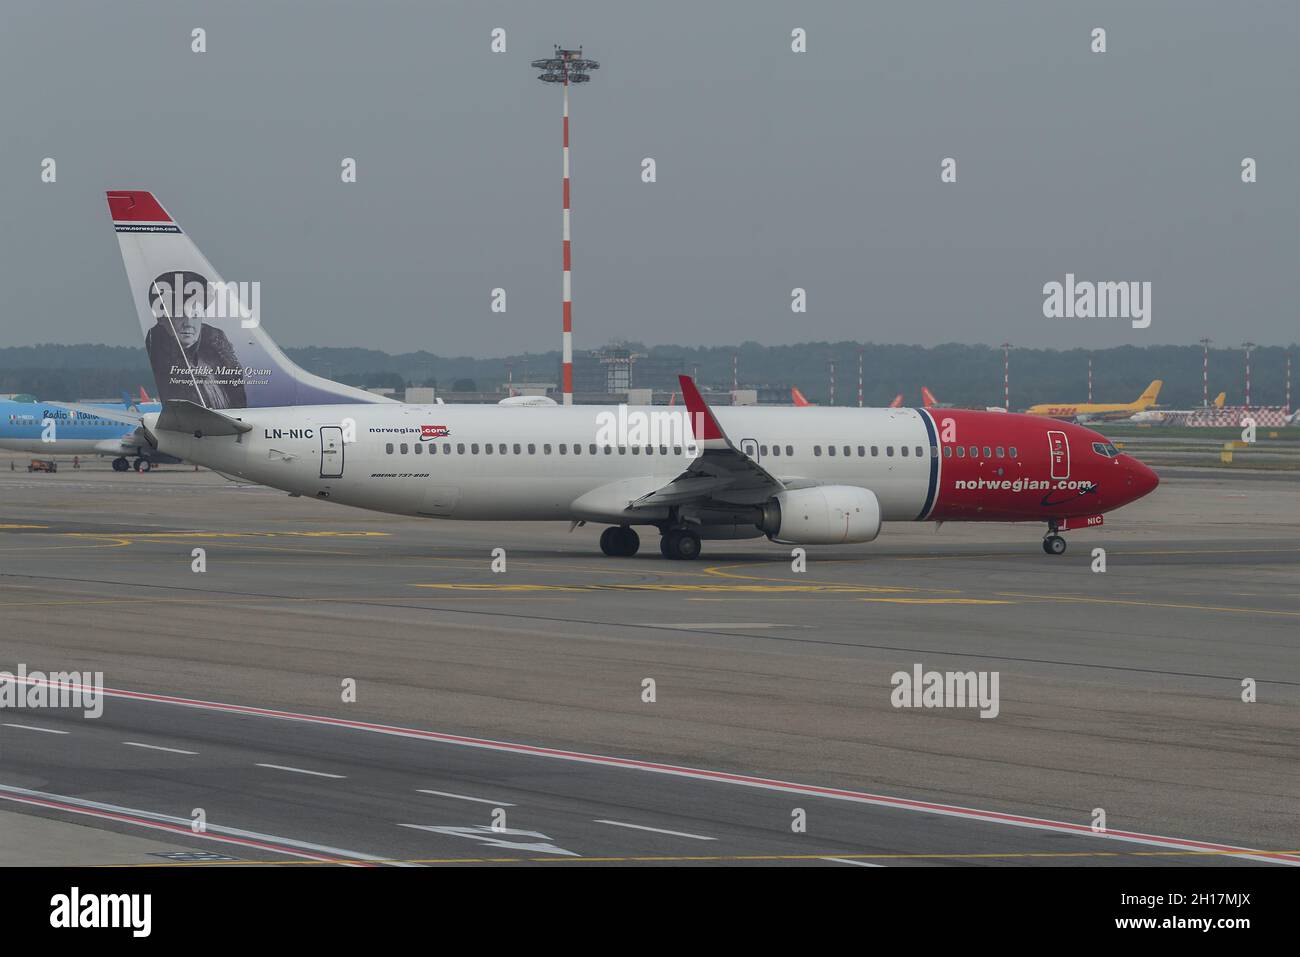 MILAN, ITALY - SEPTEMBER 29, 2017: Norwegian Air Shuttle Boeing 737-8JP (LN-NIC) with a portrait of Fredrikke Marie Qwam on the airfield of Malpensa a Stock Photo